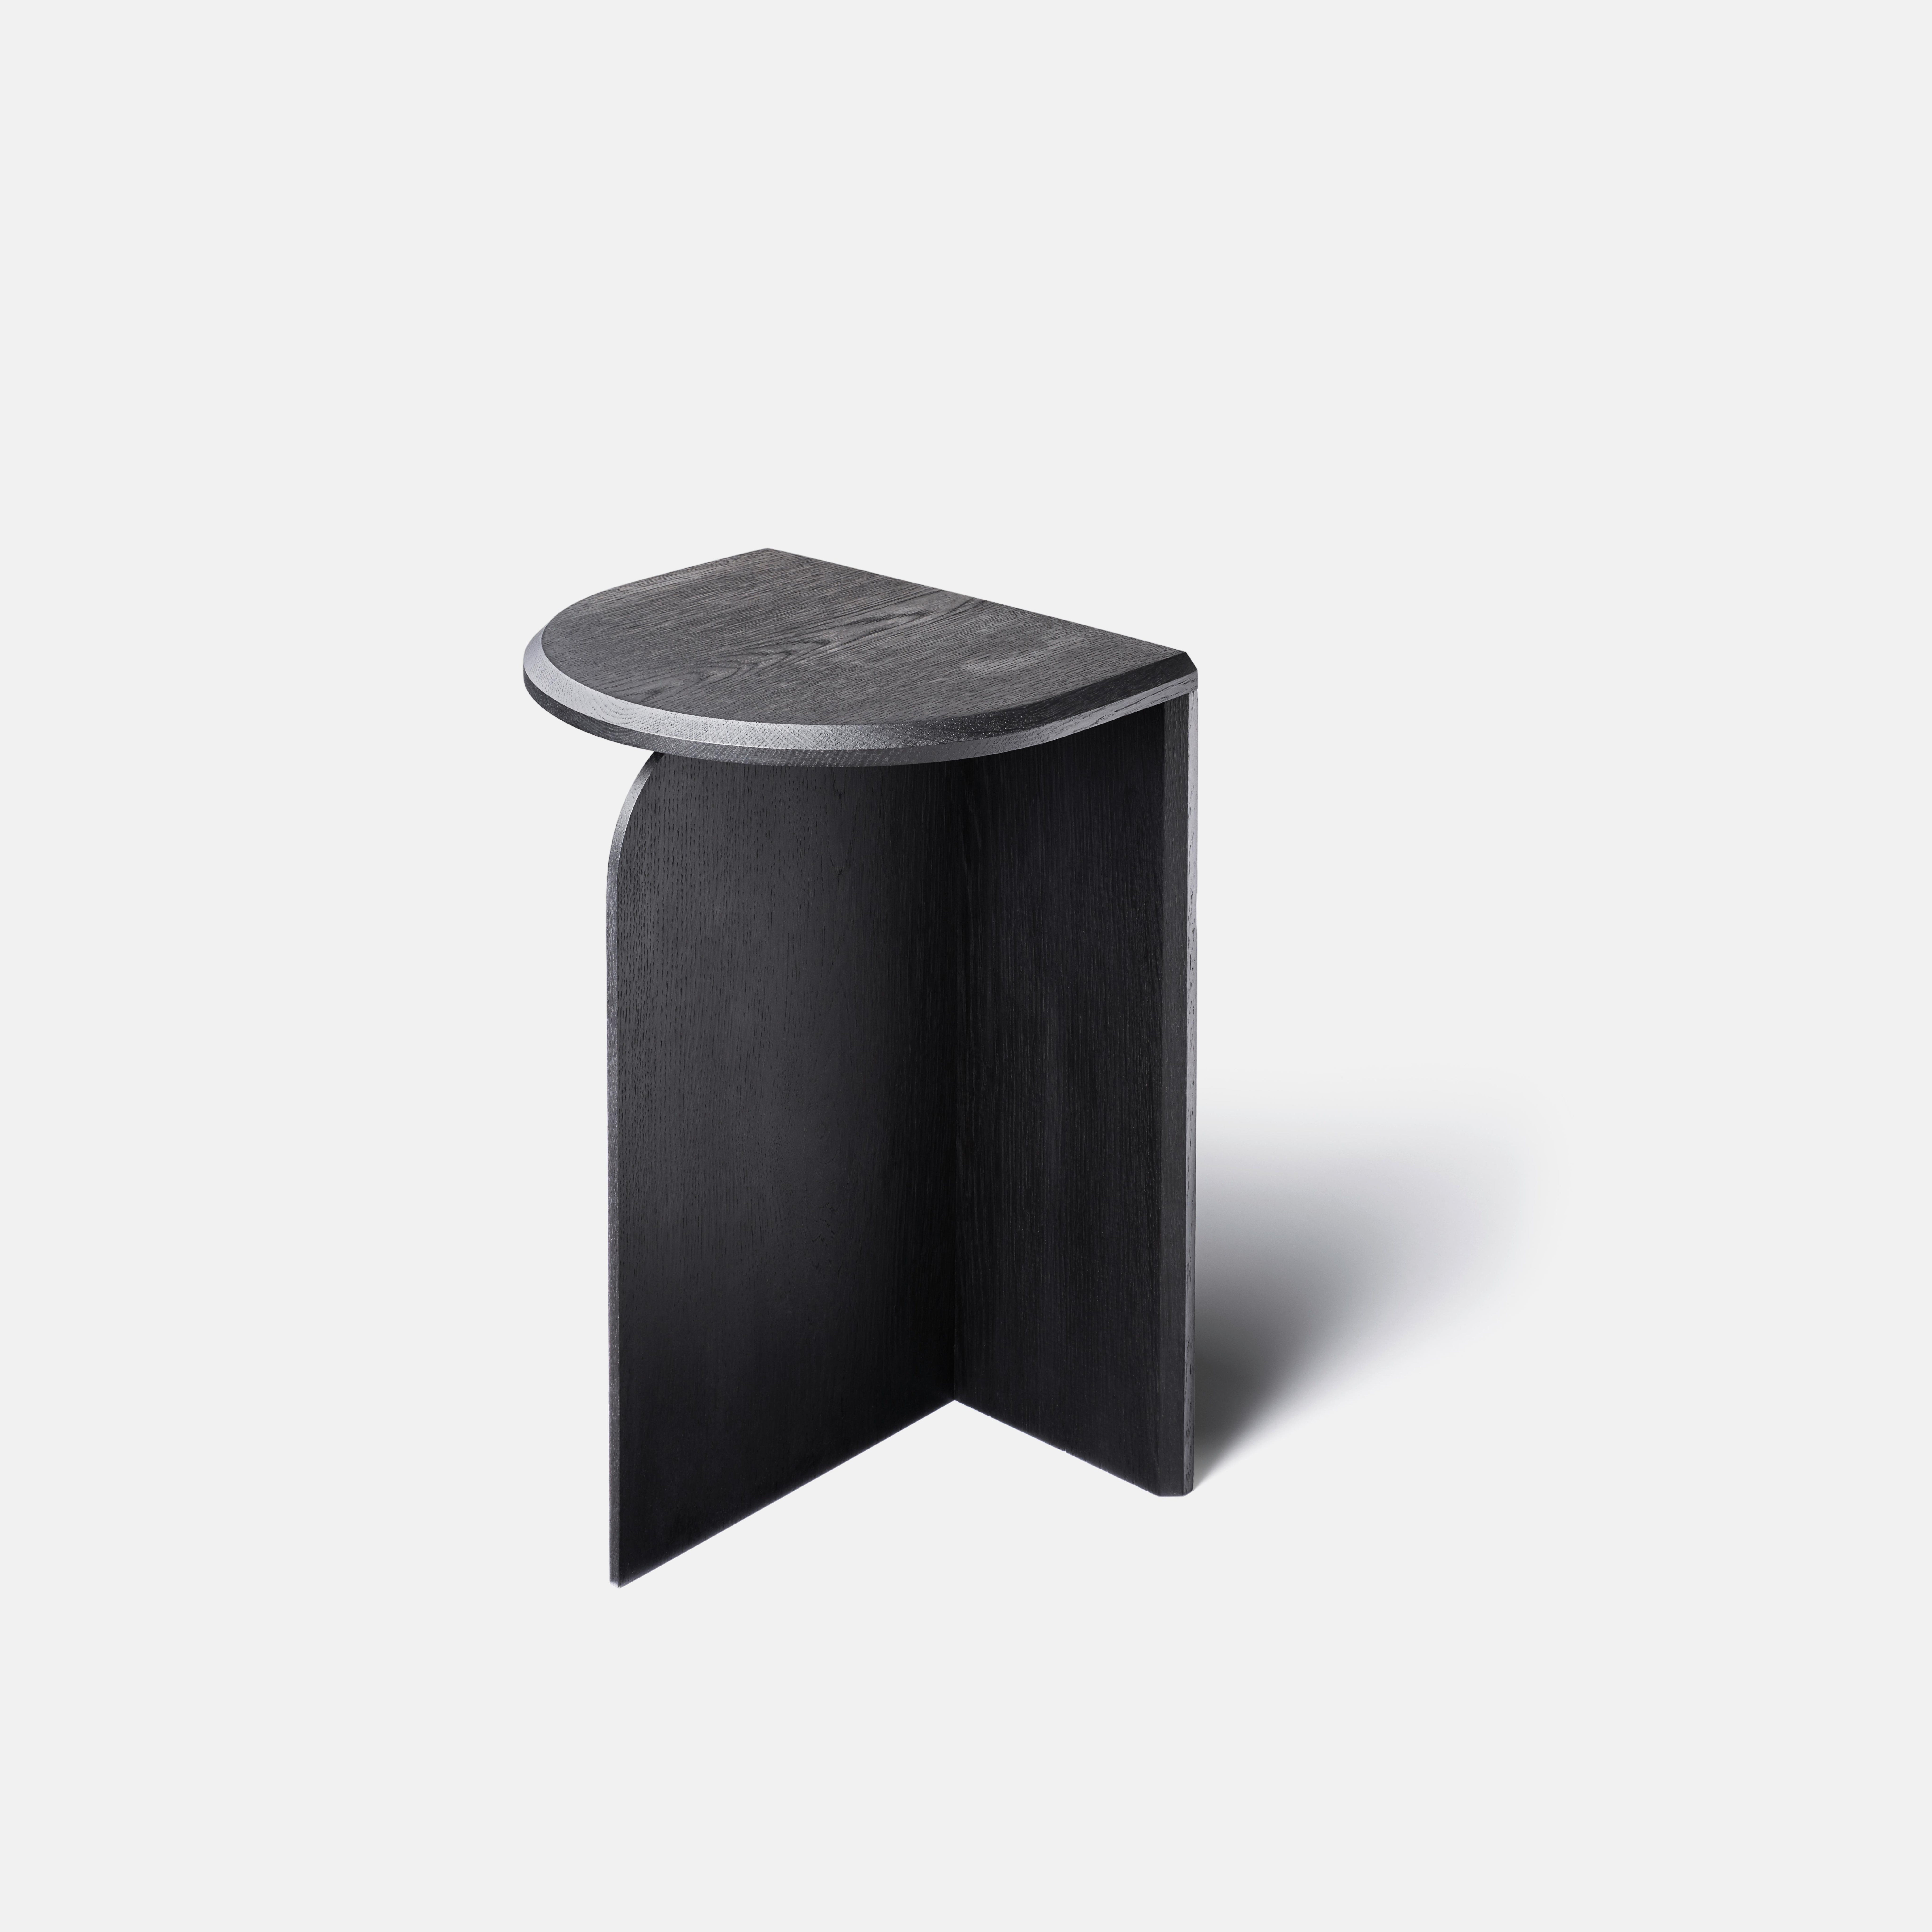 Mono is an object between a stool and a sidetable. It´s monolith- like, static appearance makes it a stand-alone piece but also works great in company. The object provides the functionality an architypical stool offers but can also serve as a